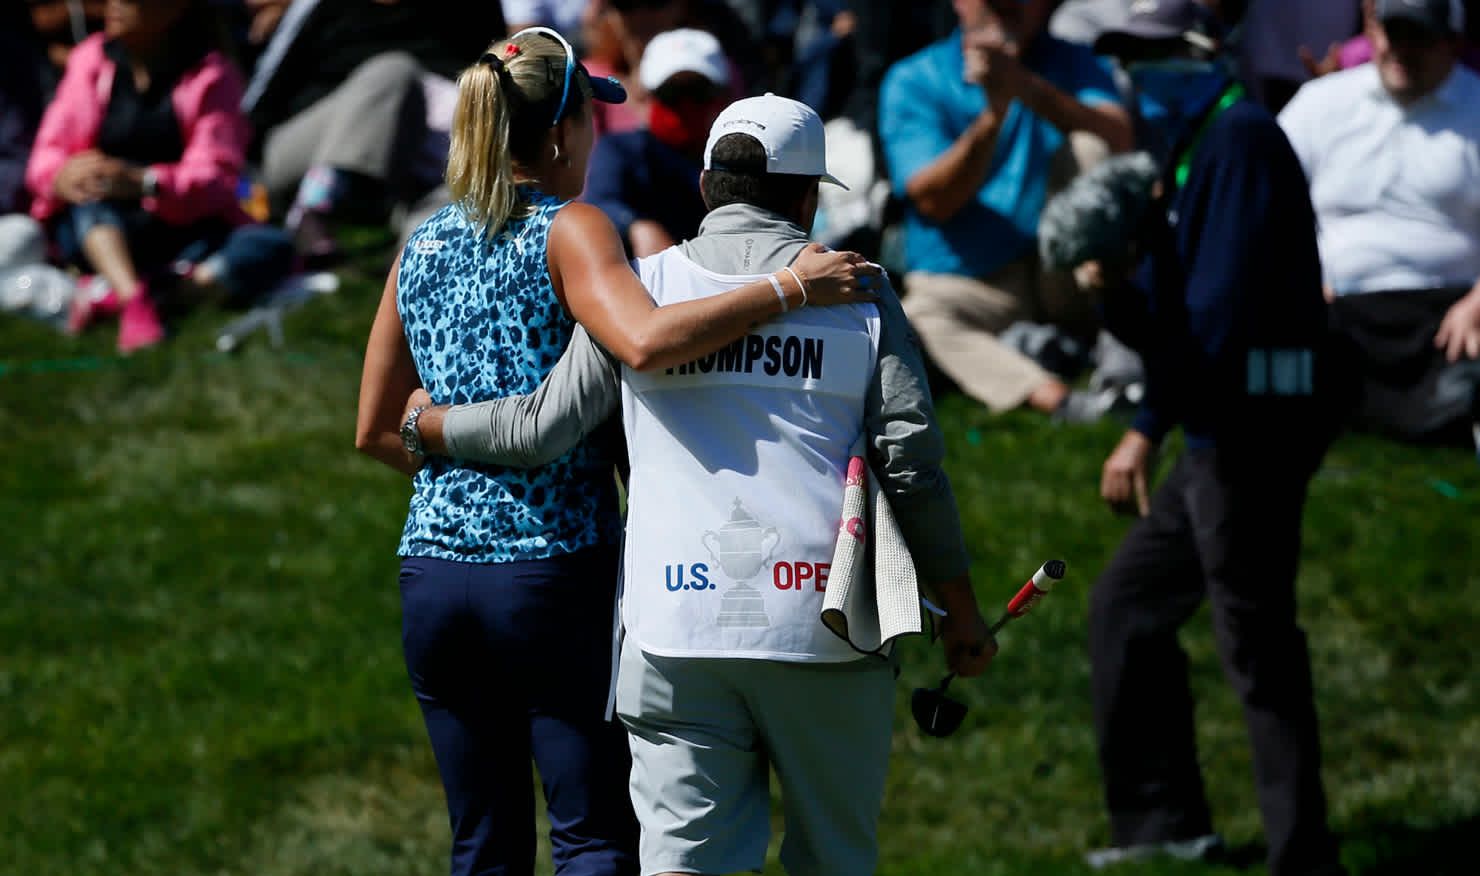 Lexi Thompson's caddie consoles her as she walks from the 72nd green and a costly bogey.